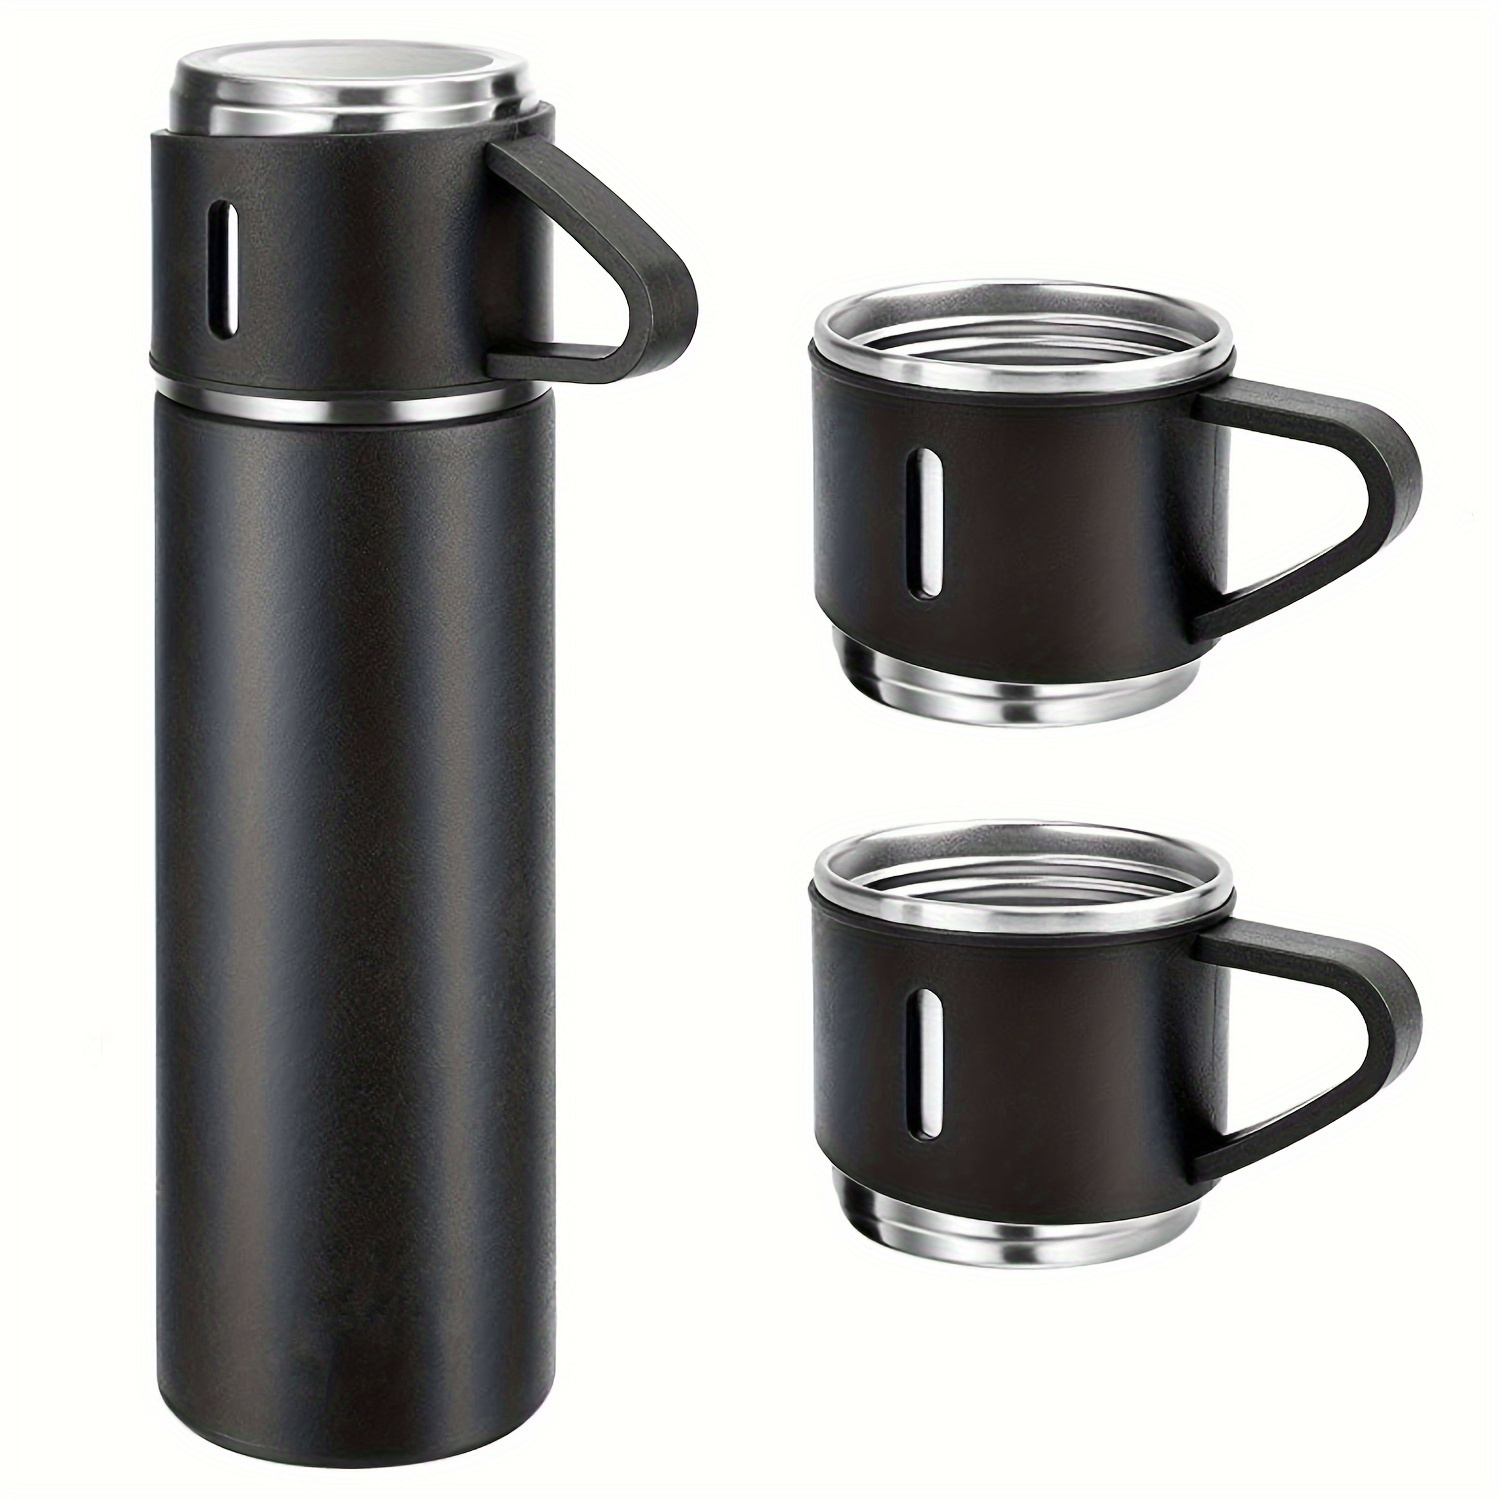 Retrok 15oz Travel Coffee Mugs Coffee Thermos with Temperature Display with Lid Portable Temperature Control Insulated Hot Cold Coffee Mug Large